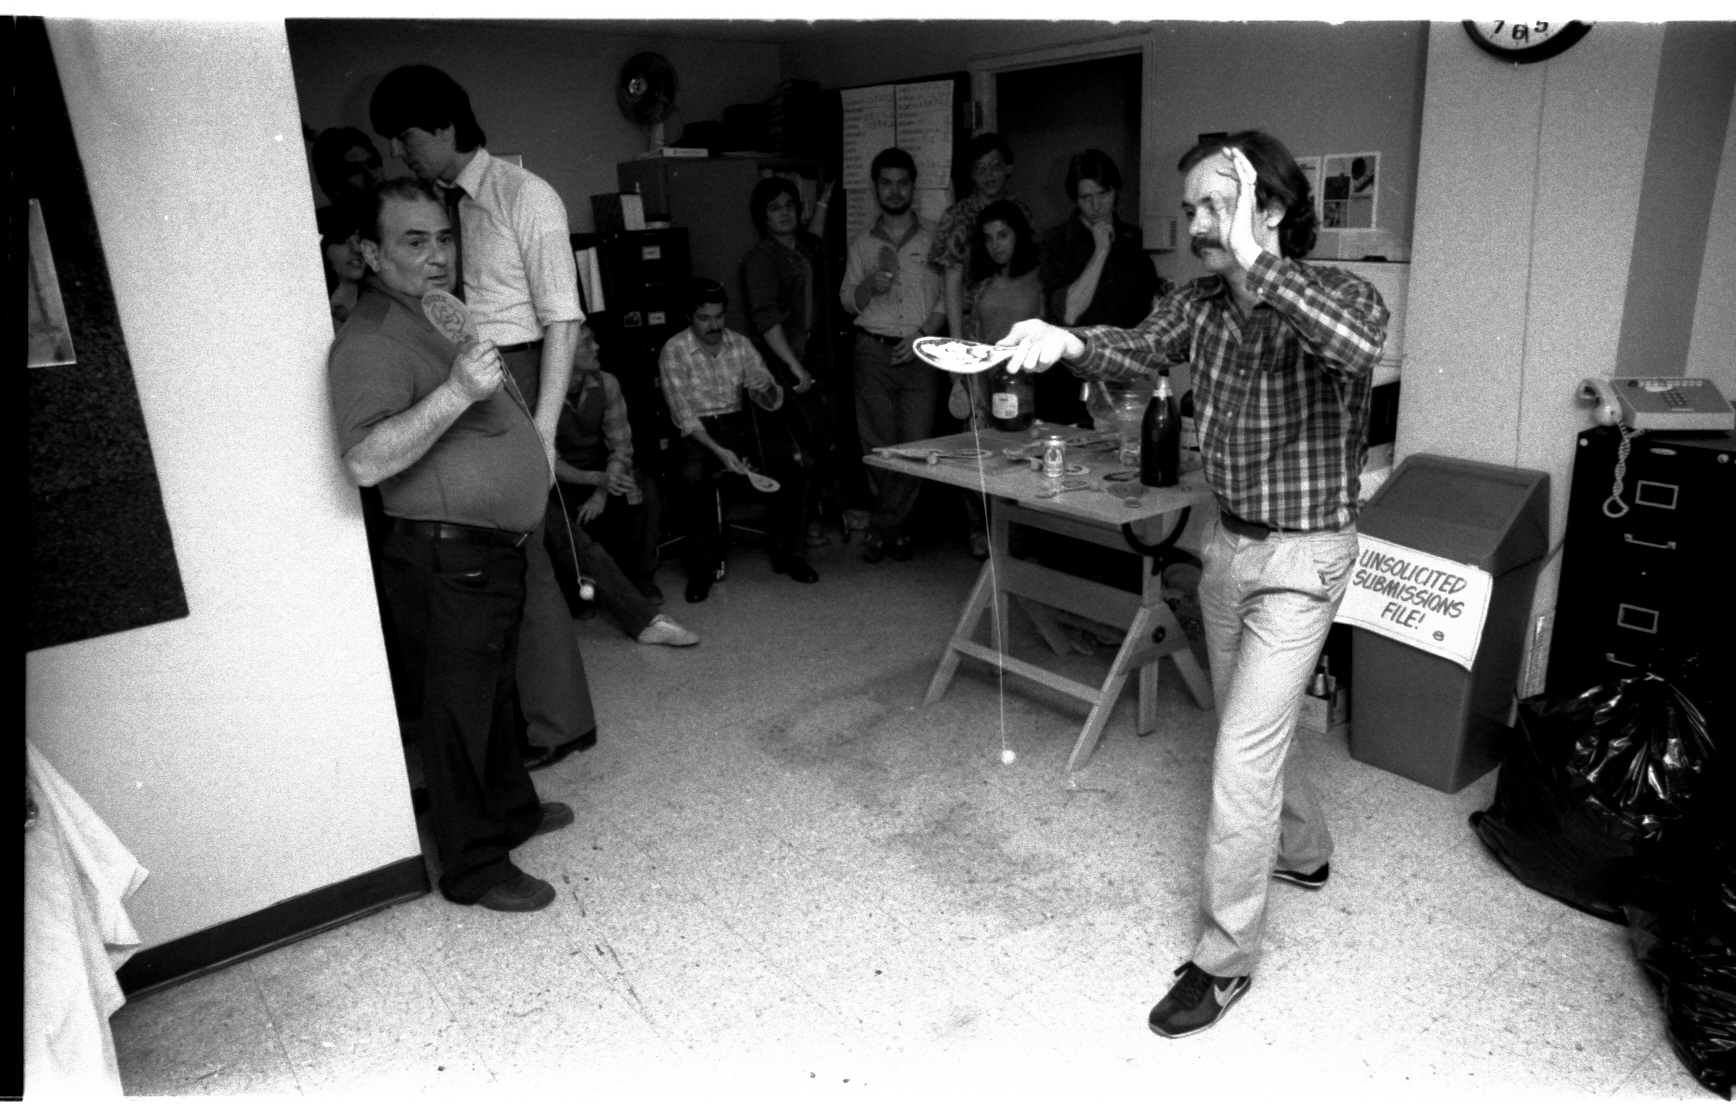 Mark Gruenwald, who really did practice, shows us how it's done! Danny can't believe his eyes. A dejected Shooter just leaves the room (to go to his office-- this whole area is his ante-room).